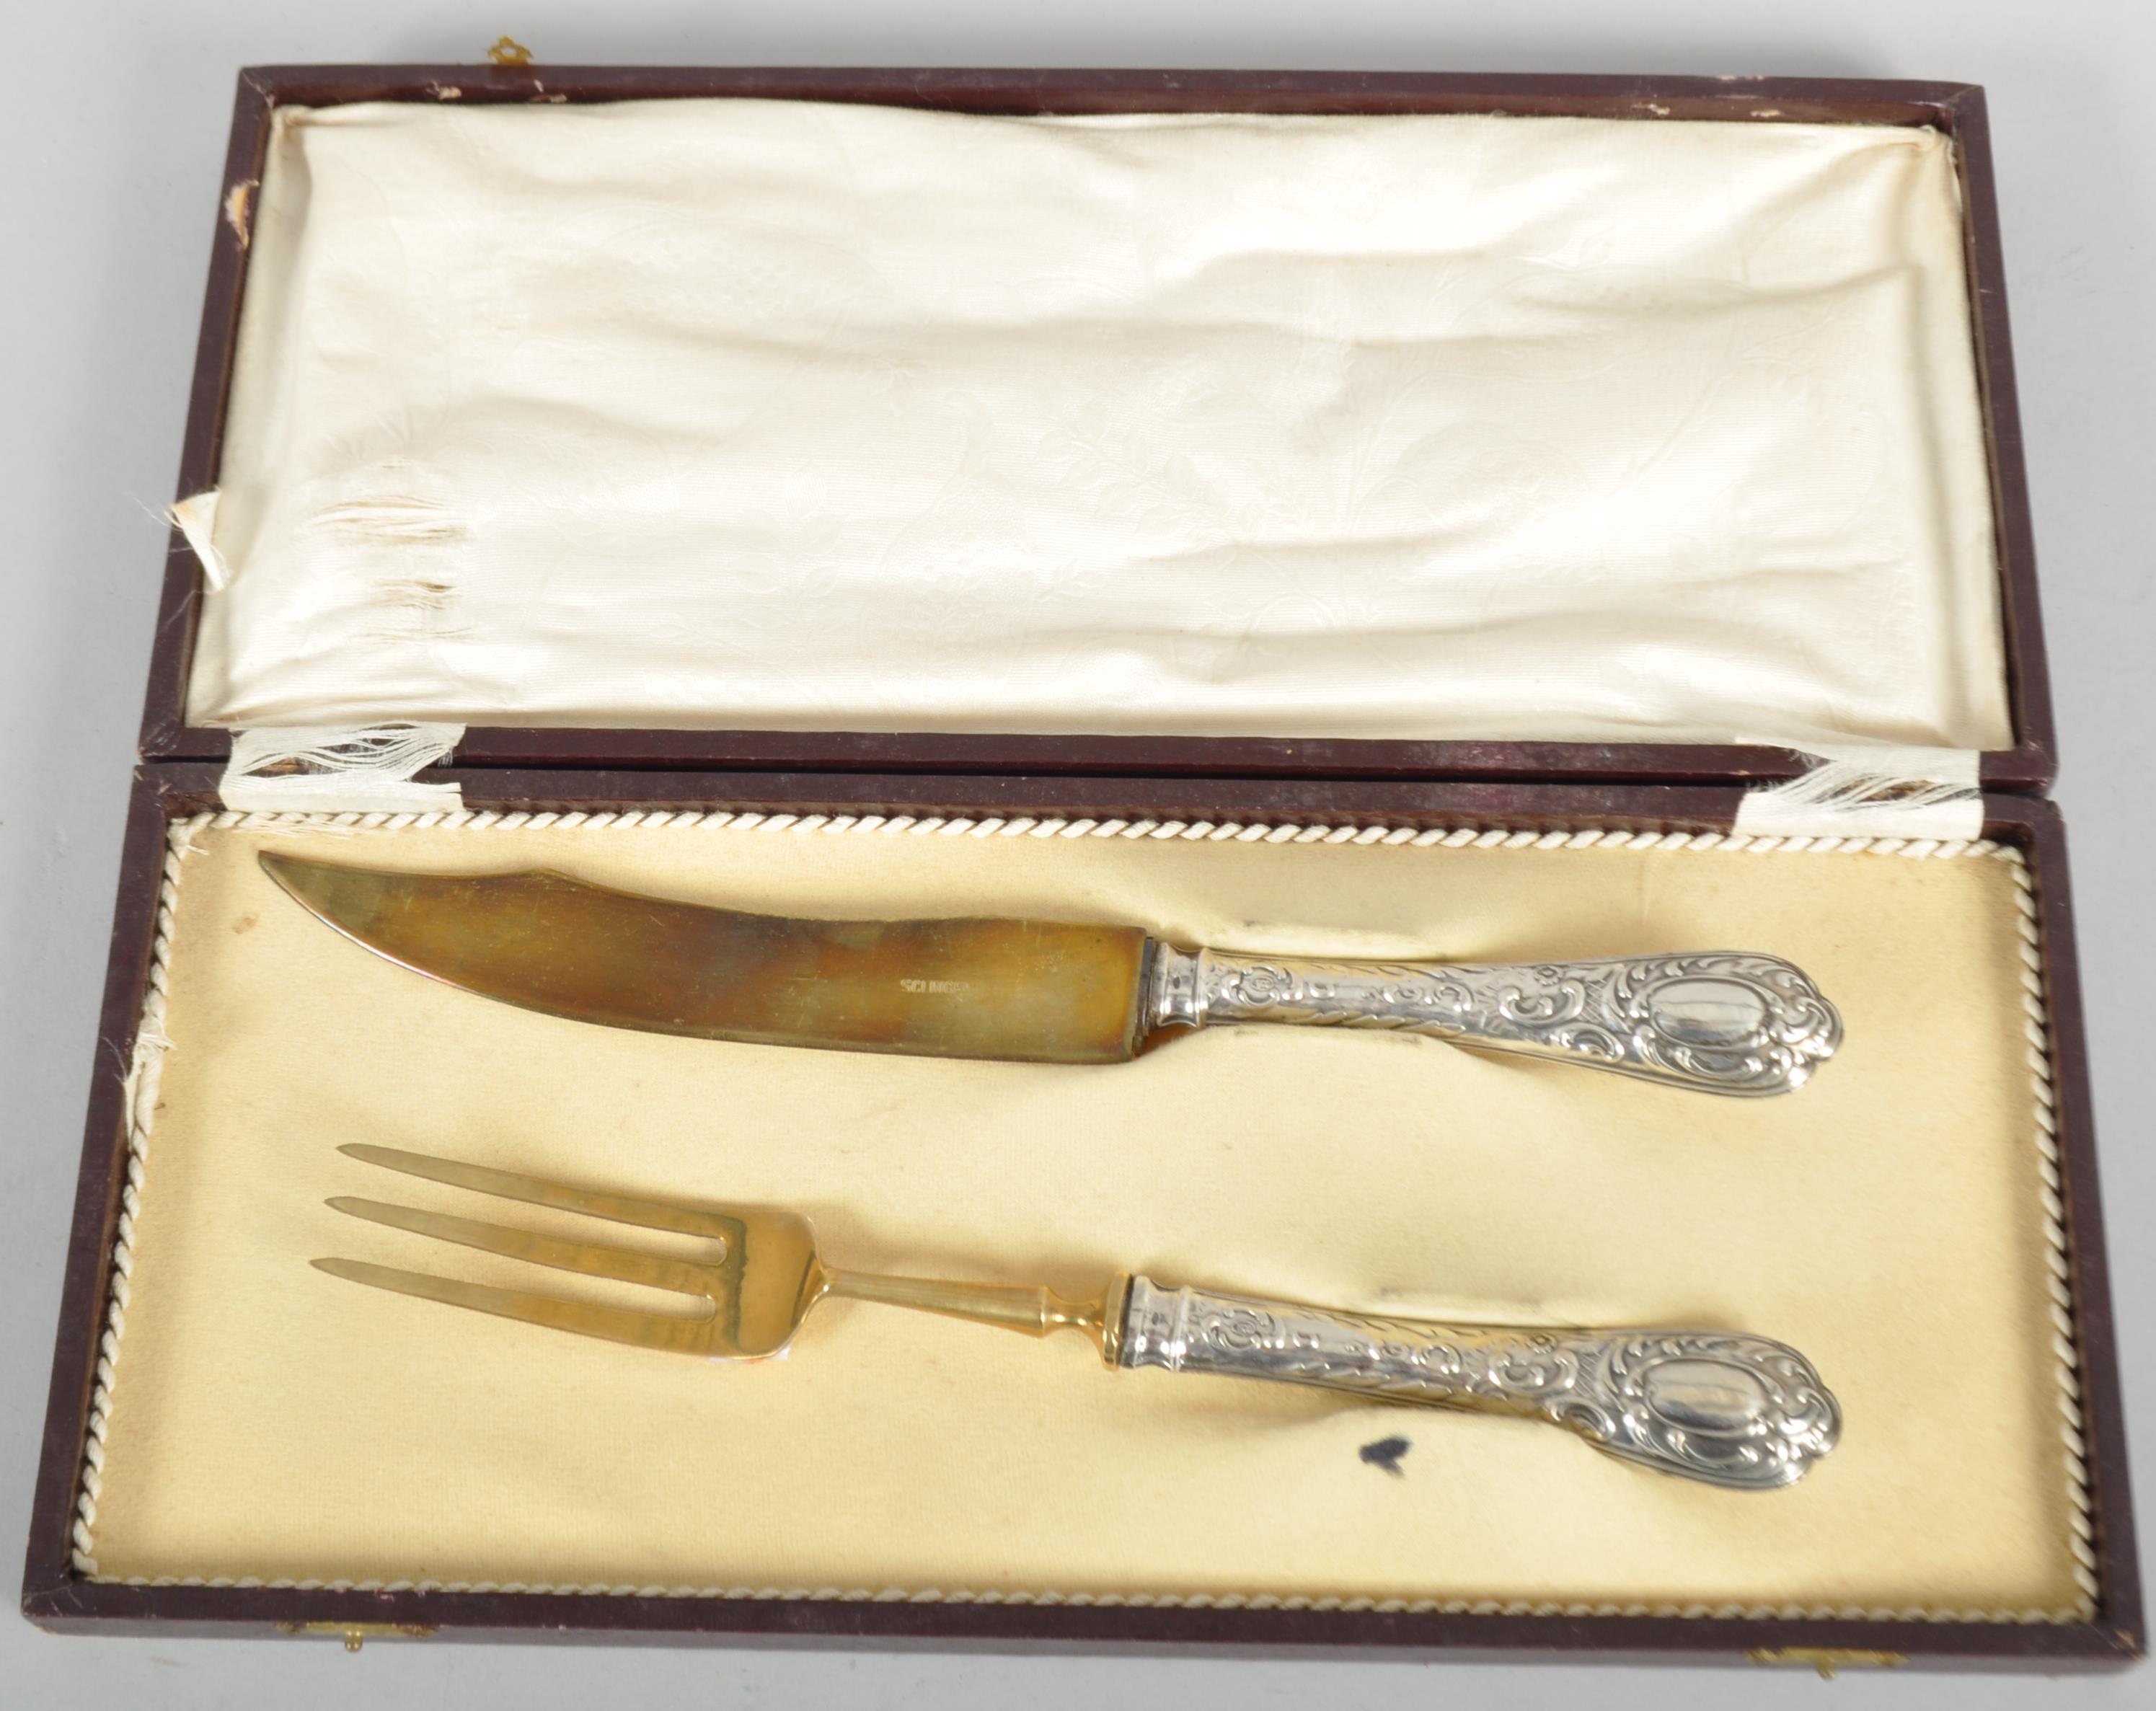 A Solingen gilded serving knife and fork, with embossed white metal handle, - Image 3 of 4